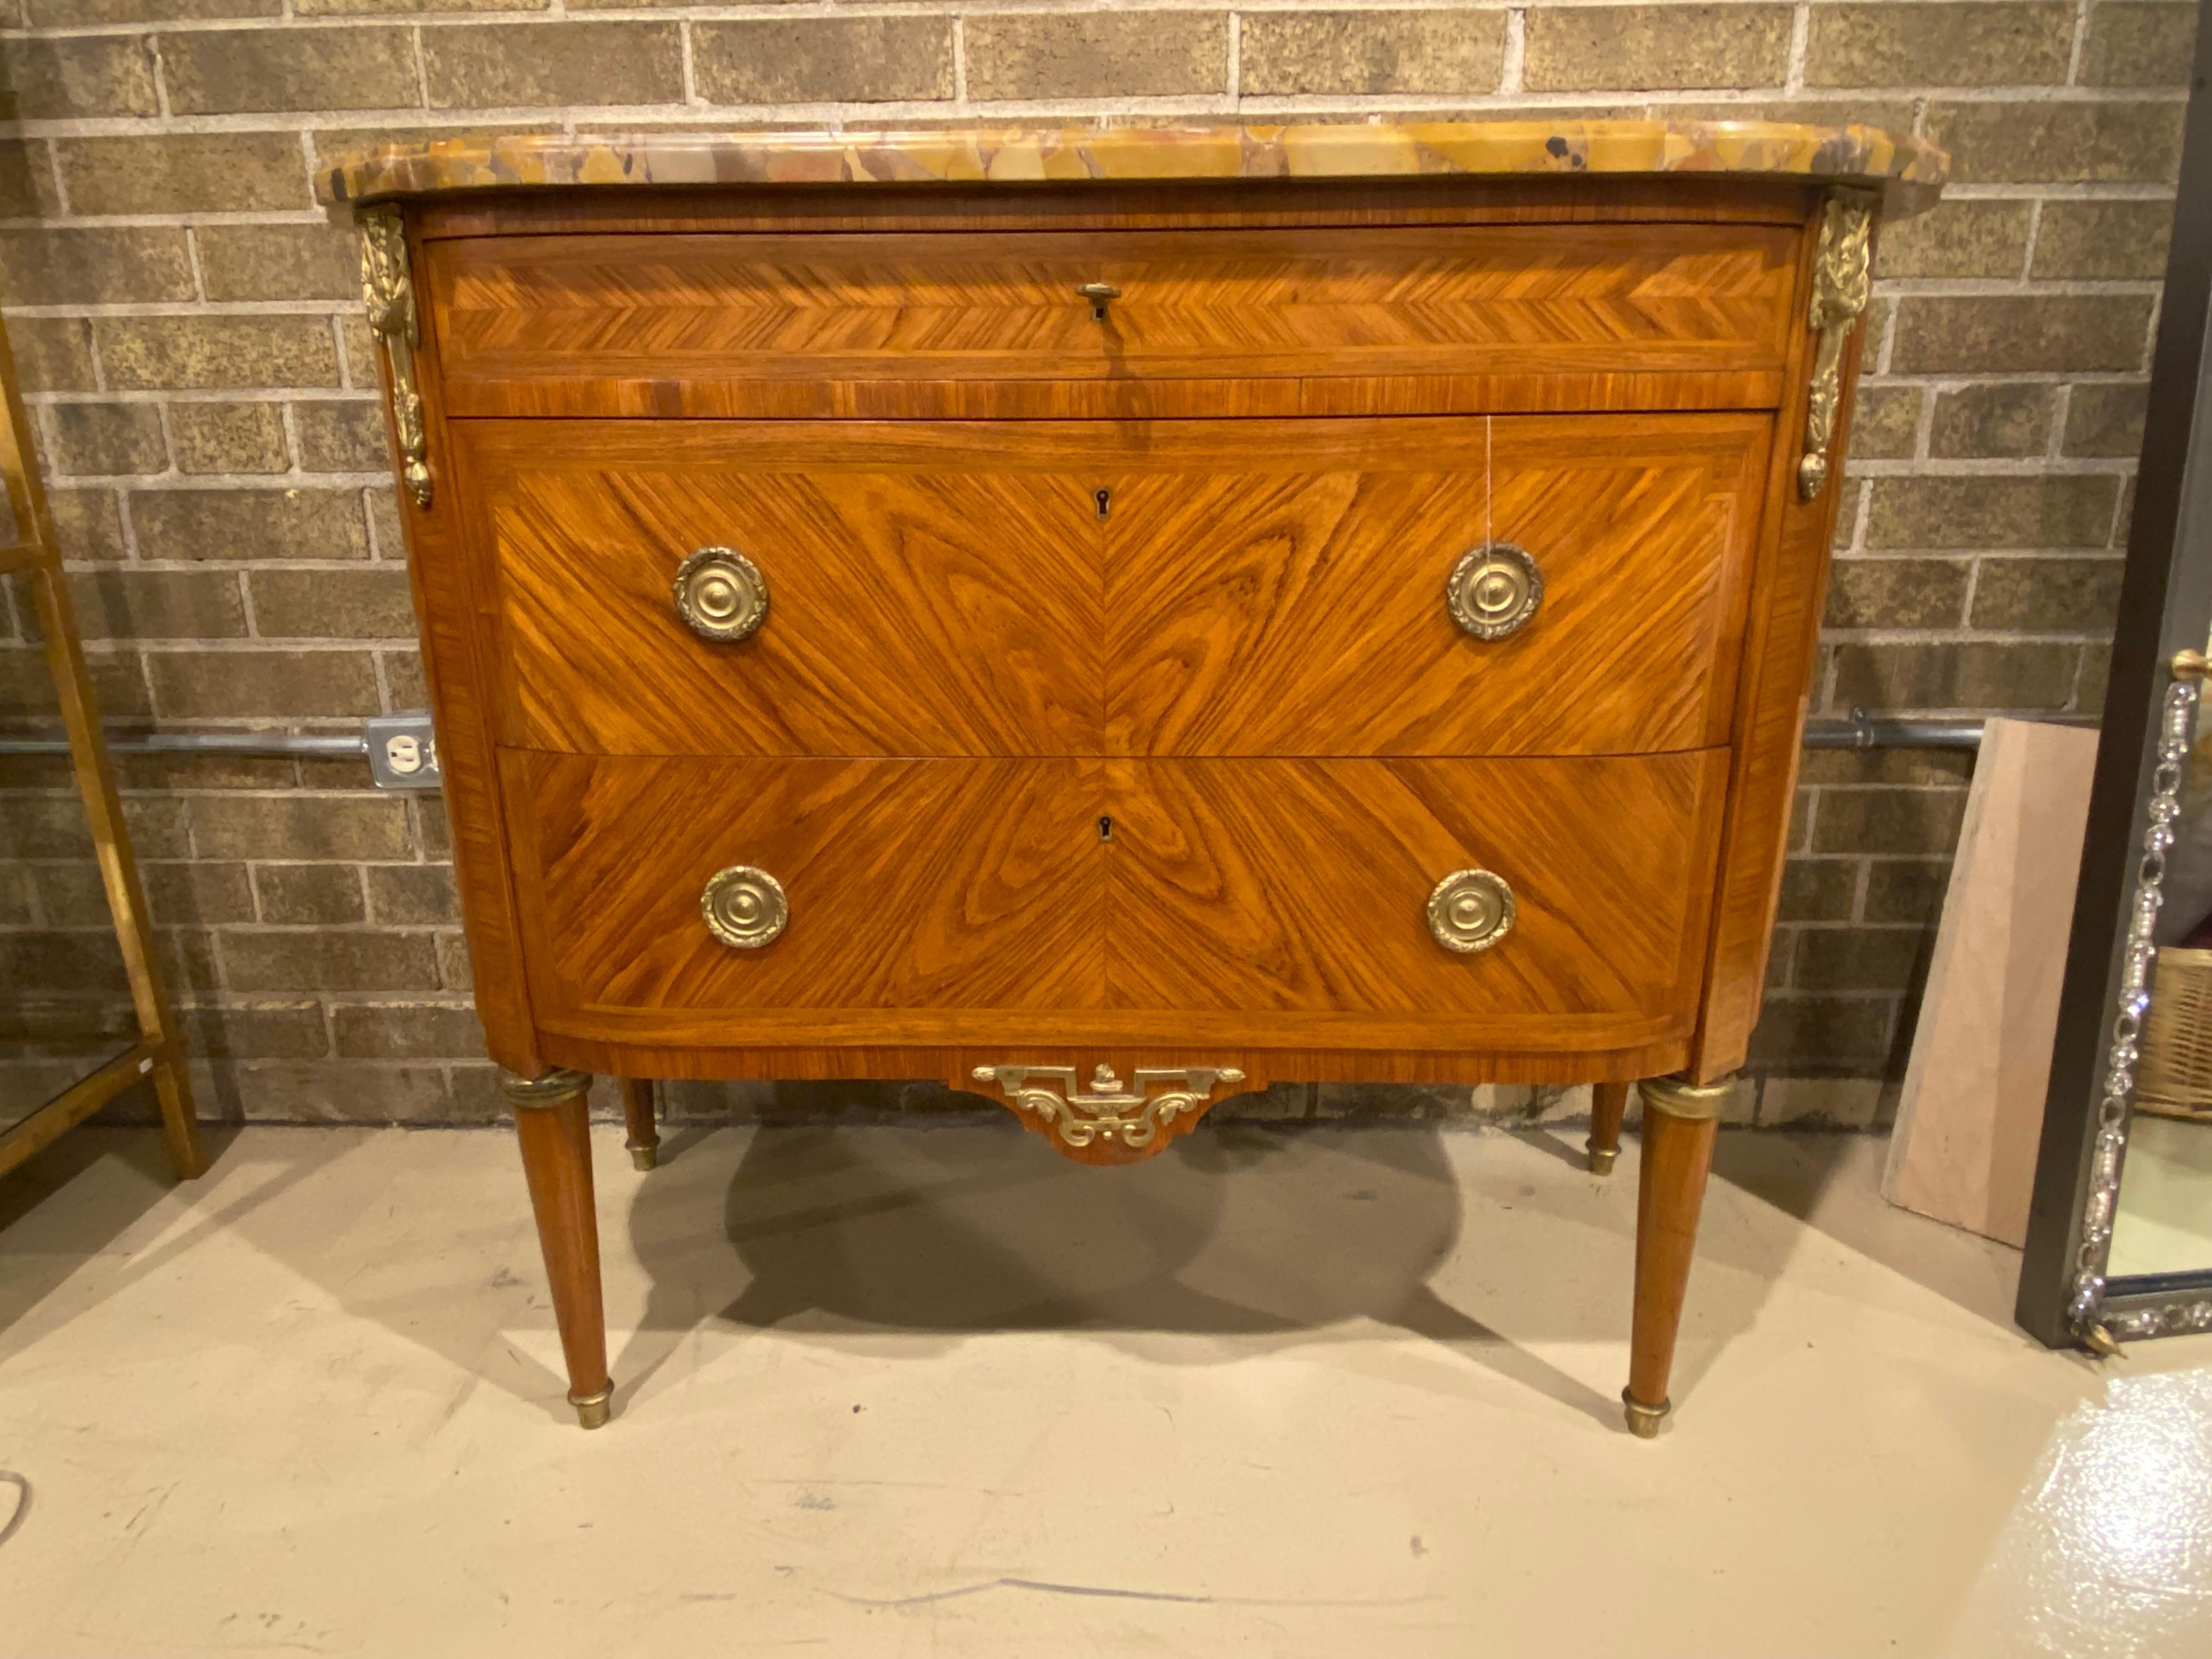 A beautifully proportioned French Louis XVI Style Marble top Demi Lune shape Commode with Ormolu Accents and three curved front drawers. The Kingwood parquetry is subtle but elegant and accented with modest but present brass or ormolu mounted